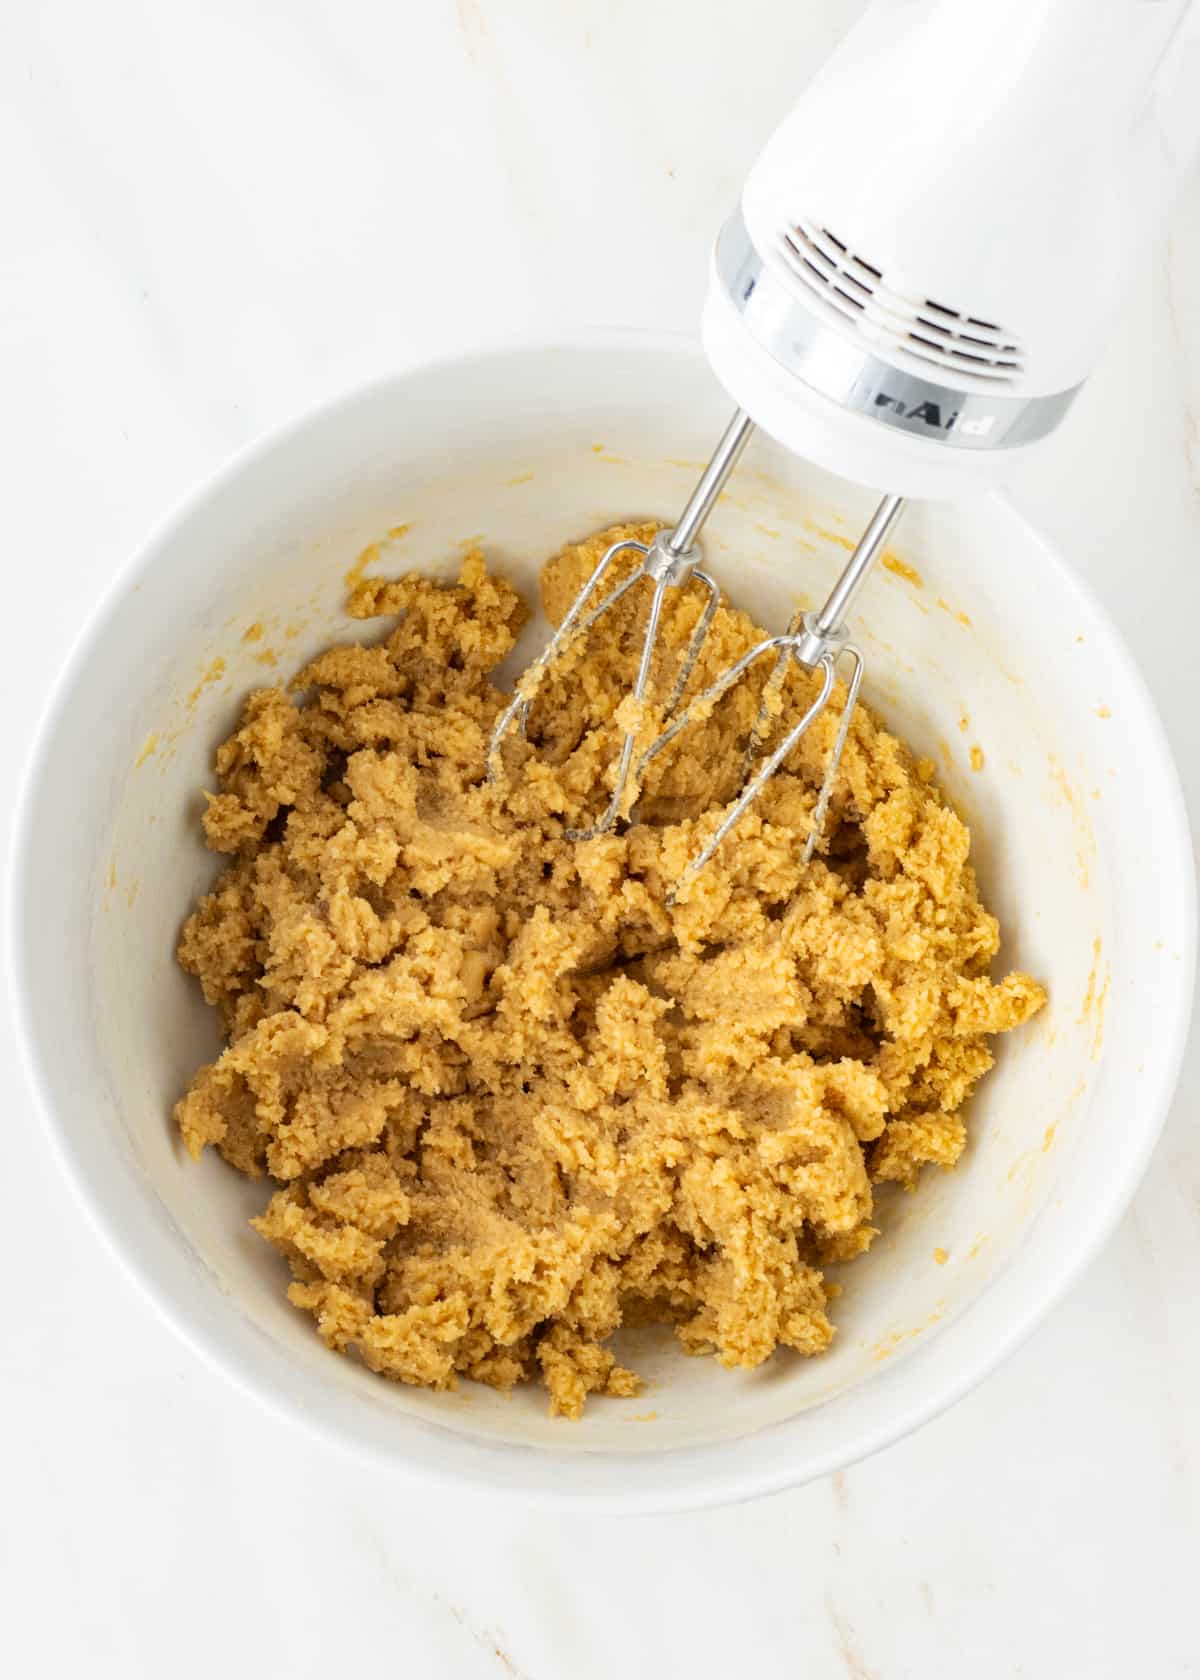 Butter, brown sugar, and white sugar creamed together in a bowl with a hand mixer on the side.